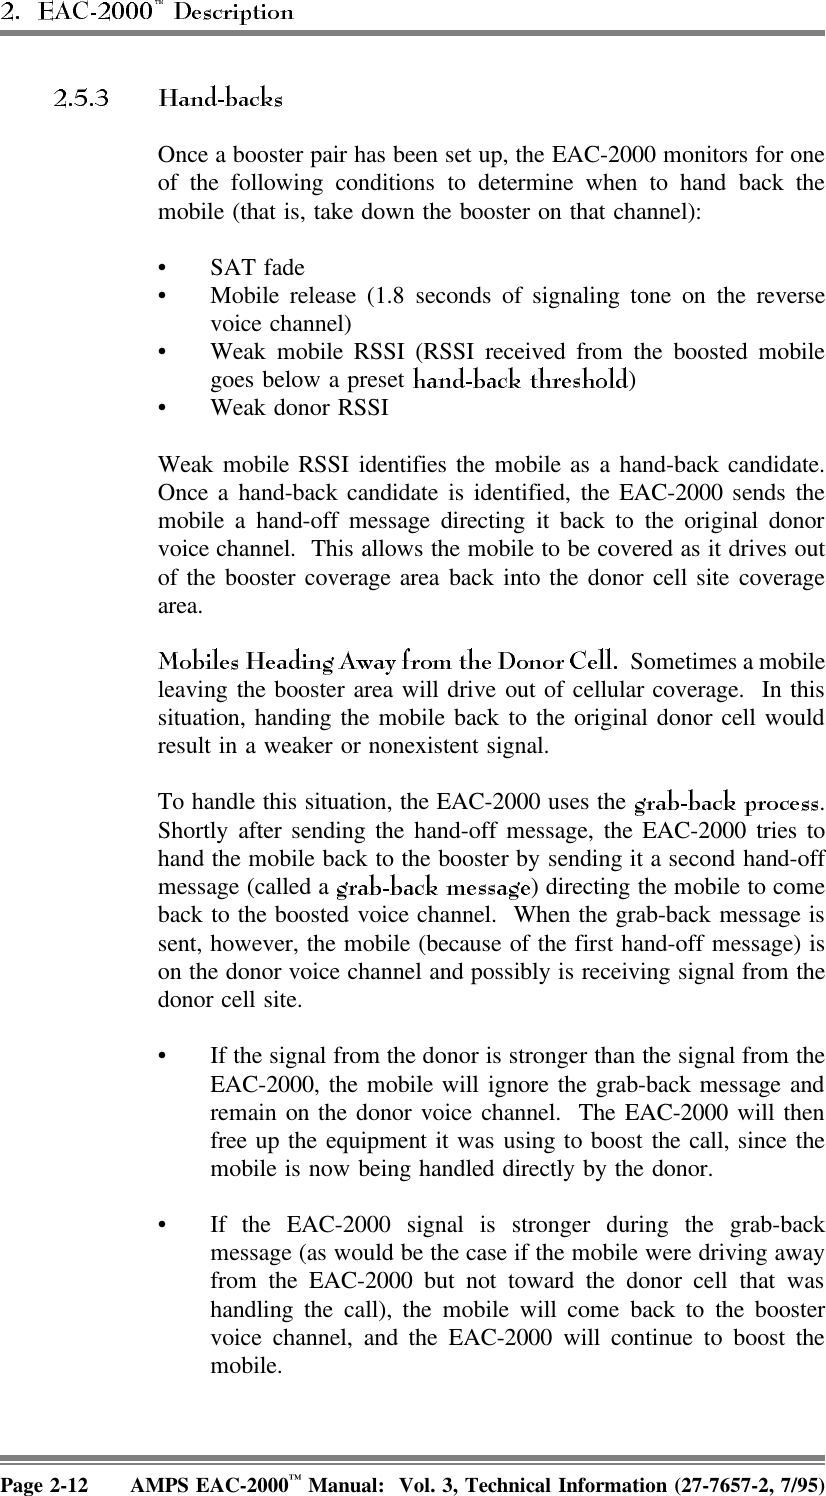 Once a booster pair has been set up, the EAC-2000 monitors for oneof the following conditions to determine when to hand back themobile (that is, take down the booster on that channel):•SAT fade • Mobile release (1.8 seconds of signaling tone on the reversevoice channel) • Weak mobile RSSI (RSSI received from the boosted mobilegoes below a preset  )• Weak donor RSSIWeak mobile RSSI identifies the mobile as a hand-back candidate.Once a hand-back candidate is identified, the EAC-2000 sends themobile a hand-off message directing it back to the original donorvoice channel.  This allows the mobile to be covered as it drives outof the booster coverage area back into the donor cell site coveragearea.  Sometimes a mobileleaving the booster area will drive out of cellular coverage.  In thissituation, handing the mobile back to the original donor cell wouldresult in a weaker or nonexistent signal. To handle this situation, the EAC-2000 uses the  .Shortly after sending the hand-off message, the EAC-2000 tries tohand the mobile back to the booster by sending it a second hand-offmessage (called a  ) directing the mobile to comeback to the boosted voice channel.  When the grab-back message issent, however, the mobile (because of the first hand-off message) ison the donor voice channel and possibly is receiving signal from thedonor cell site. • If the signal from the donor is stronger than the signal from theEAC-2000, the mobile will ignore the grab-back message andremain on the donor voice channel.  The EAC-2000 will thenfree up the equipment it was using to boost the call, since themobile is now being handled directly by the donor.• If the EAC-2000 signal is stronger during the grab-backmessage (as would be the case if the mobile were driving awayfrom the EAC-2000 but not toward the donor cell that washandling the call), the mobile will come back to the boostervoice channel, and the EAC-2000 will continue to boost themobile.Page 2-12 AMPS EAC-2000™ Manual:  Vol. 3, Technical Information (27-7657-2, 7/95)